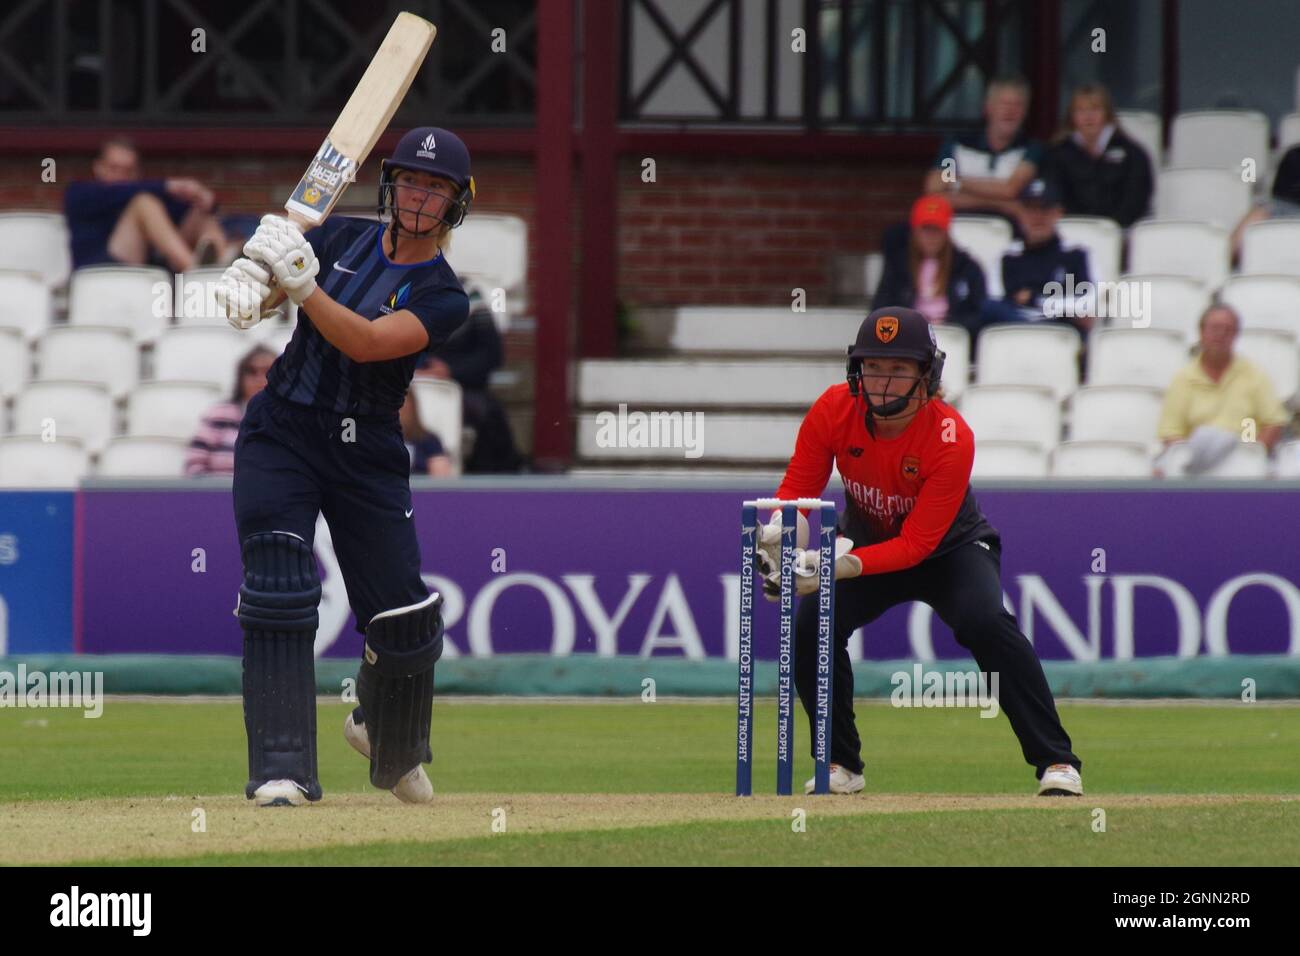 Northampton, England, 25 September 2021. Ami Campbell batting for Northern Diamonds against Southern Vipers in the Rachael Heyhoe Flint Trophy Final at the County Ground Northampton. Carla Rudd is keeping wicket. Credit: Colin Edwards Stock Photo